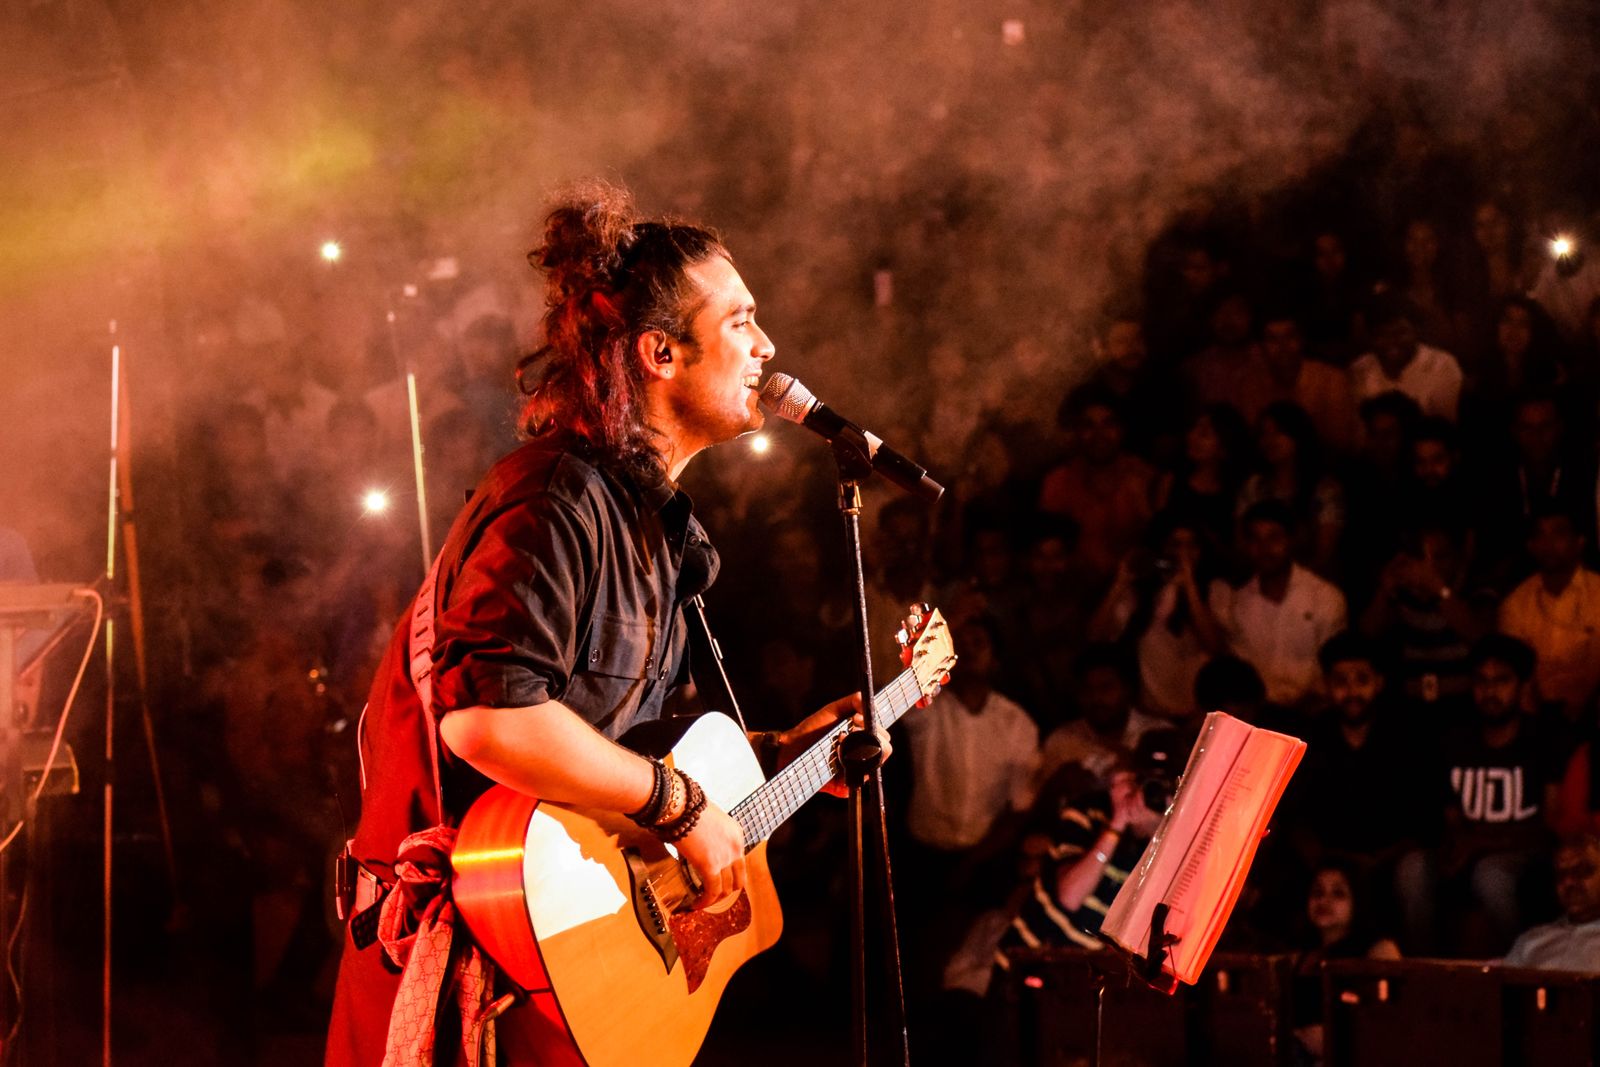 Jubin Nautiyal Returns With Rooftop Concert Post Pandemic On Valentine’s Day